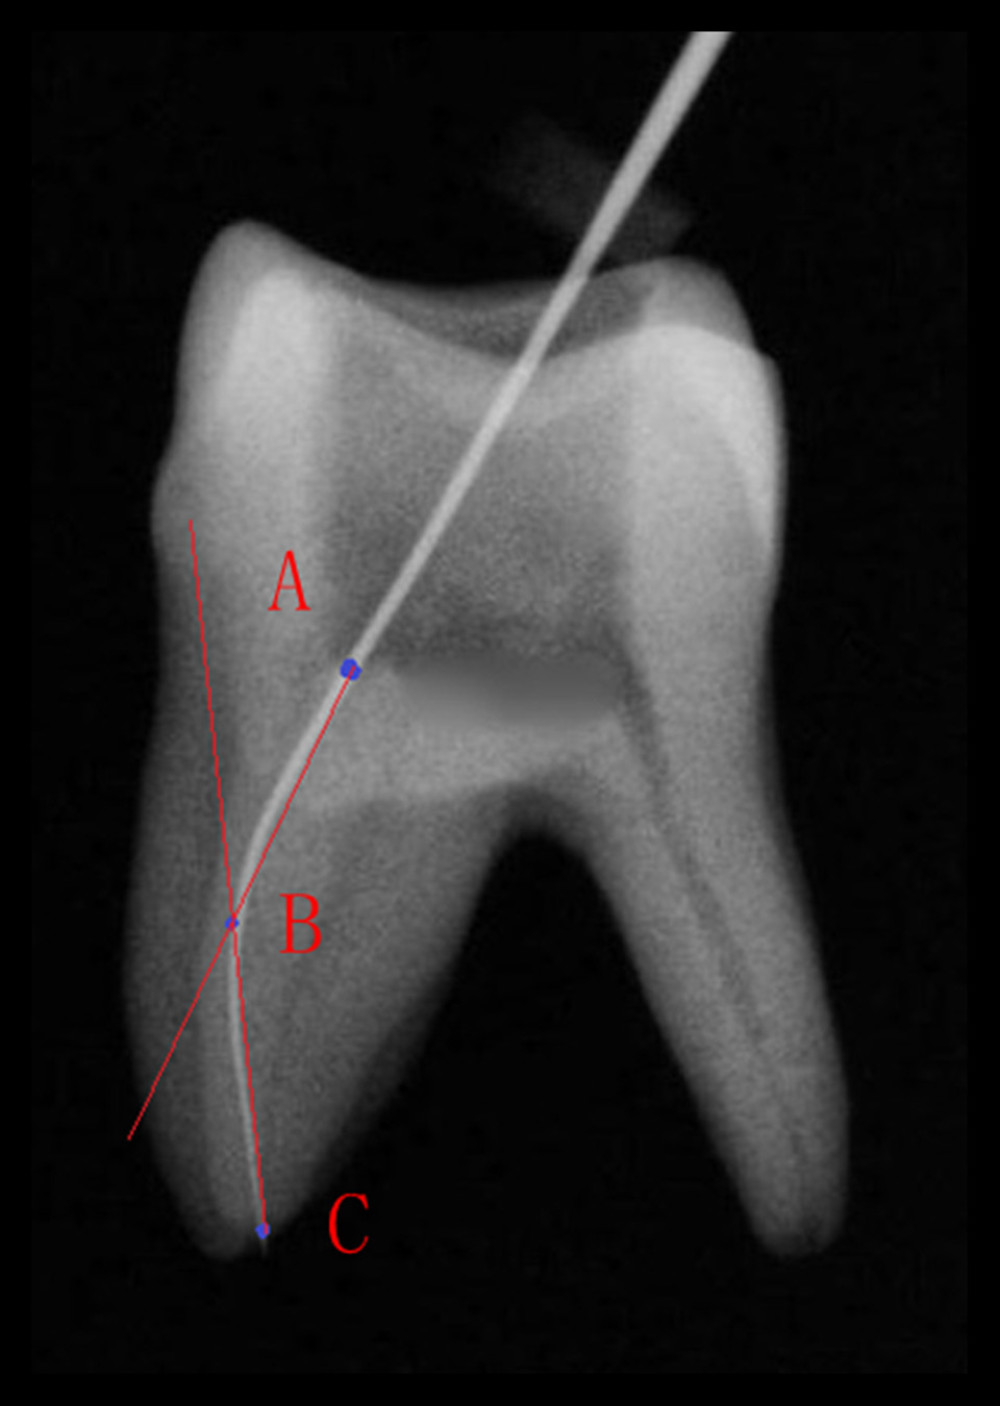 Root canal curvature measurement (Point A) the root canal orifice (Point B) the canal began to leave the long axis of the tooth (Point C) the apical foramen